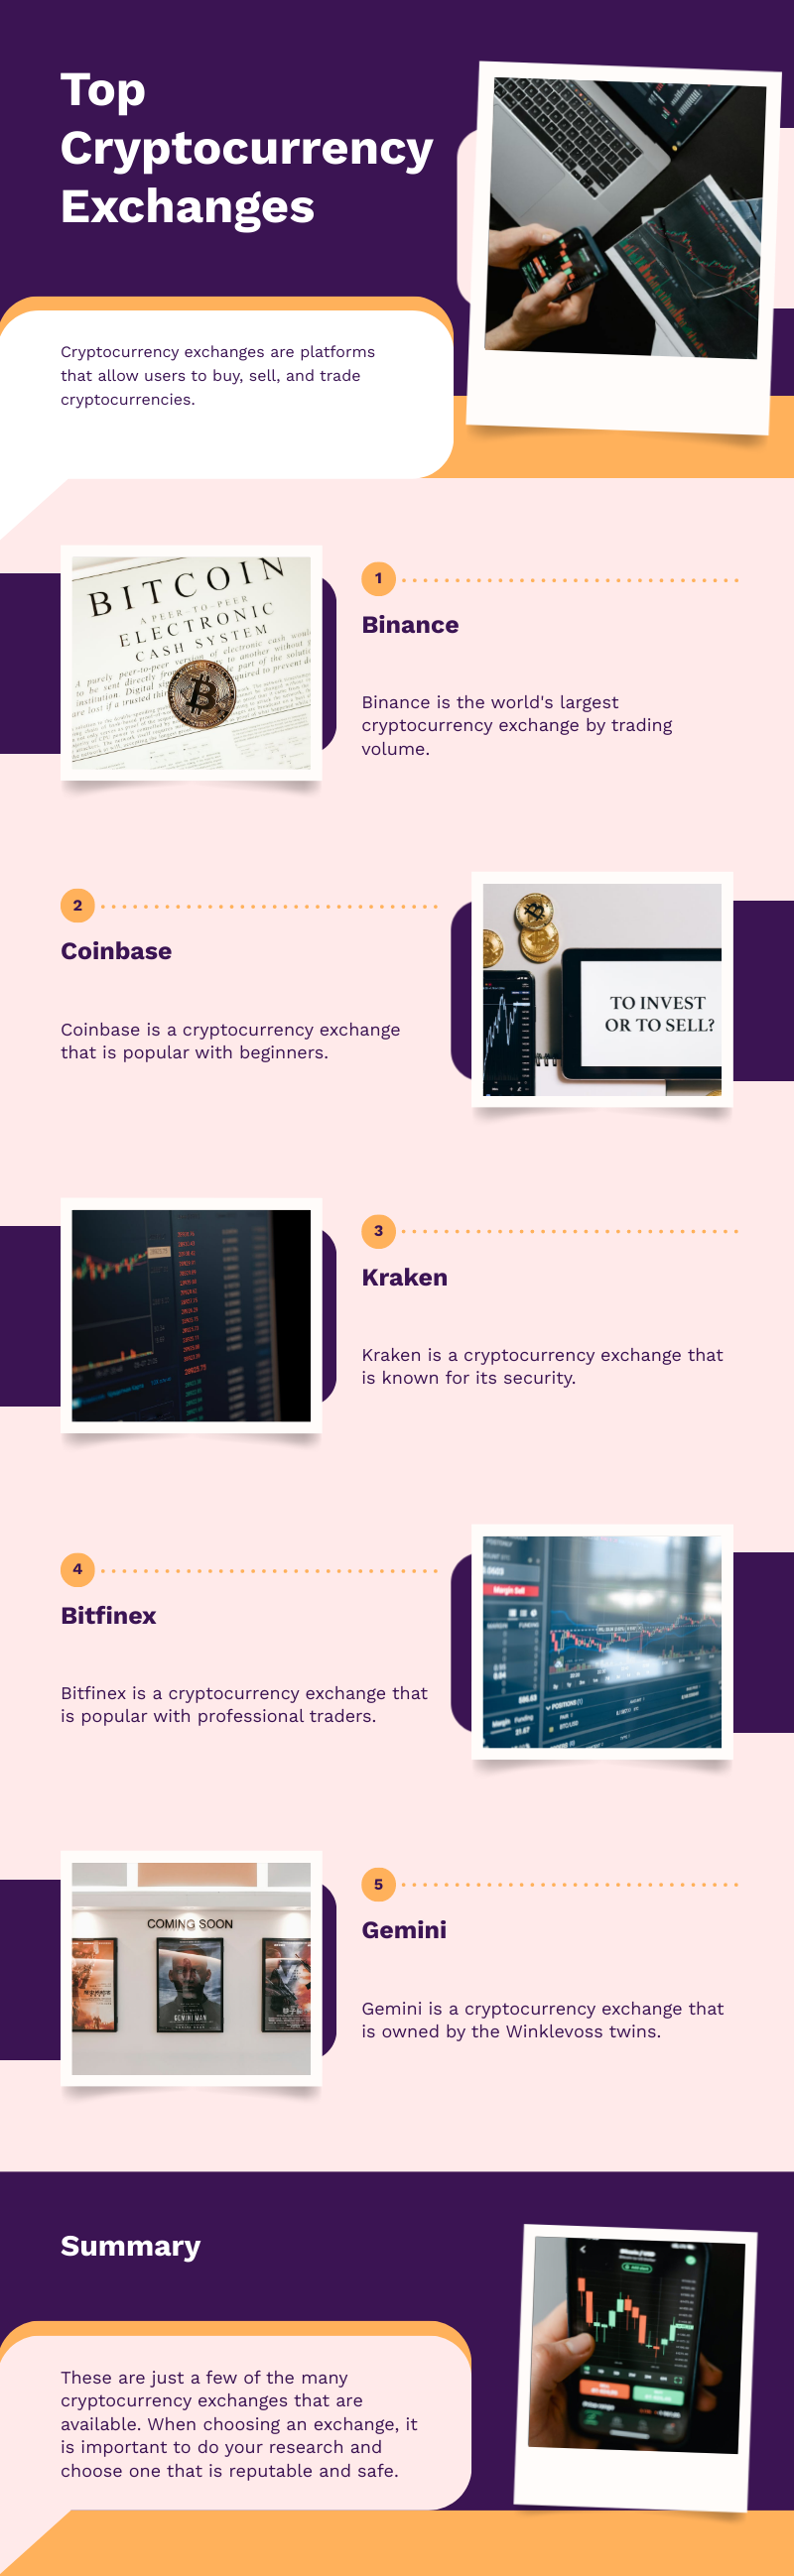 Infographic titled 'Top Cryptocurrency Exchanges' describes various trading platforms, including Binance as the largest by volume, Coinbase popular with beginners, Kraken known for security, Bitfinex favored by professionals, and Gemini owned by the Winklevoss twins. 